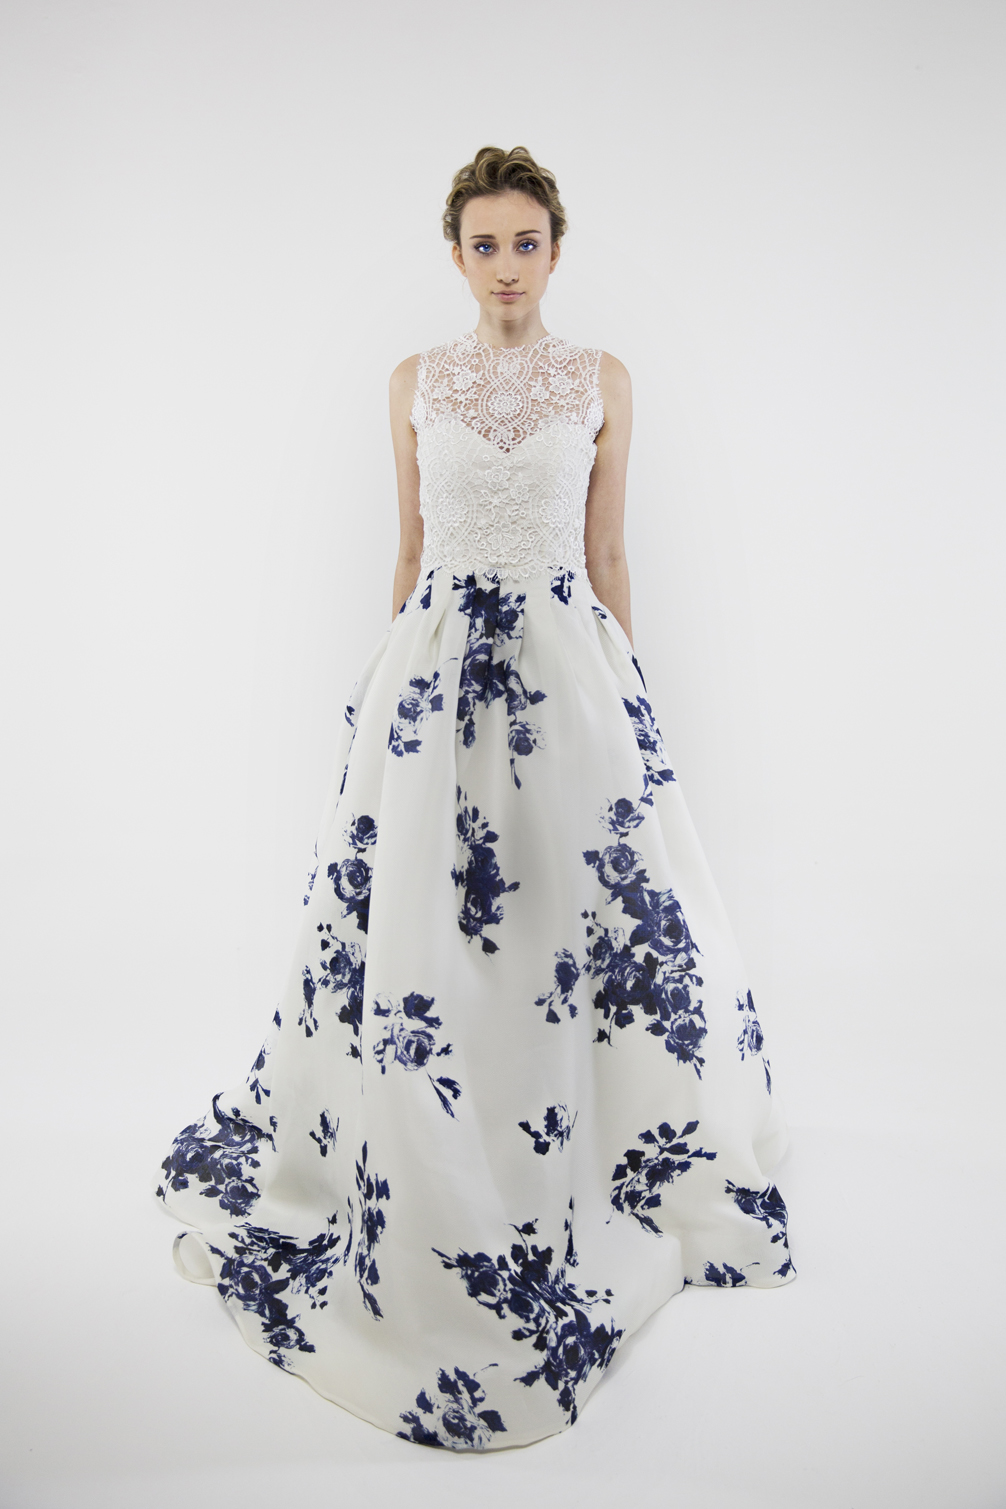 20 Floral Wedding Dresses That Will Take Your Breath Away 